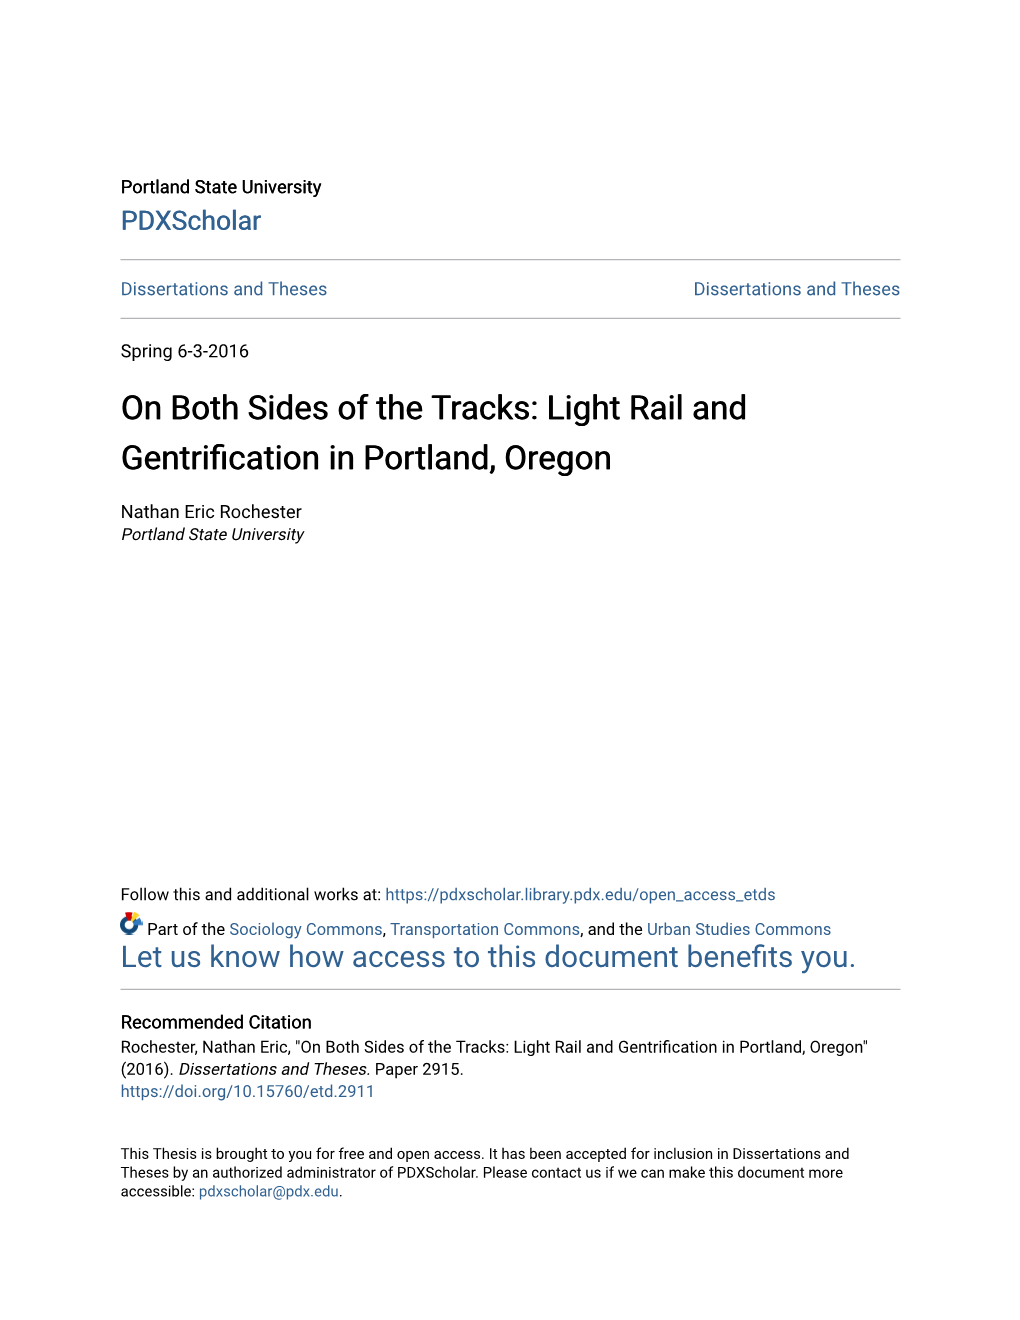 On Both Sides of the Tracks: Light Rail and Gentrification in Portland, Oregon